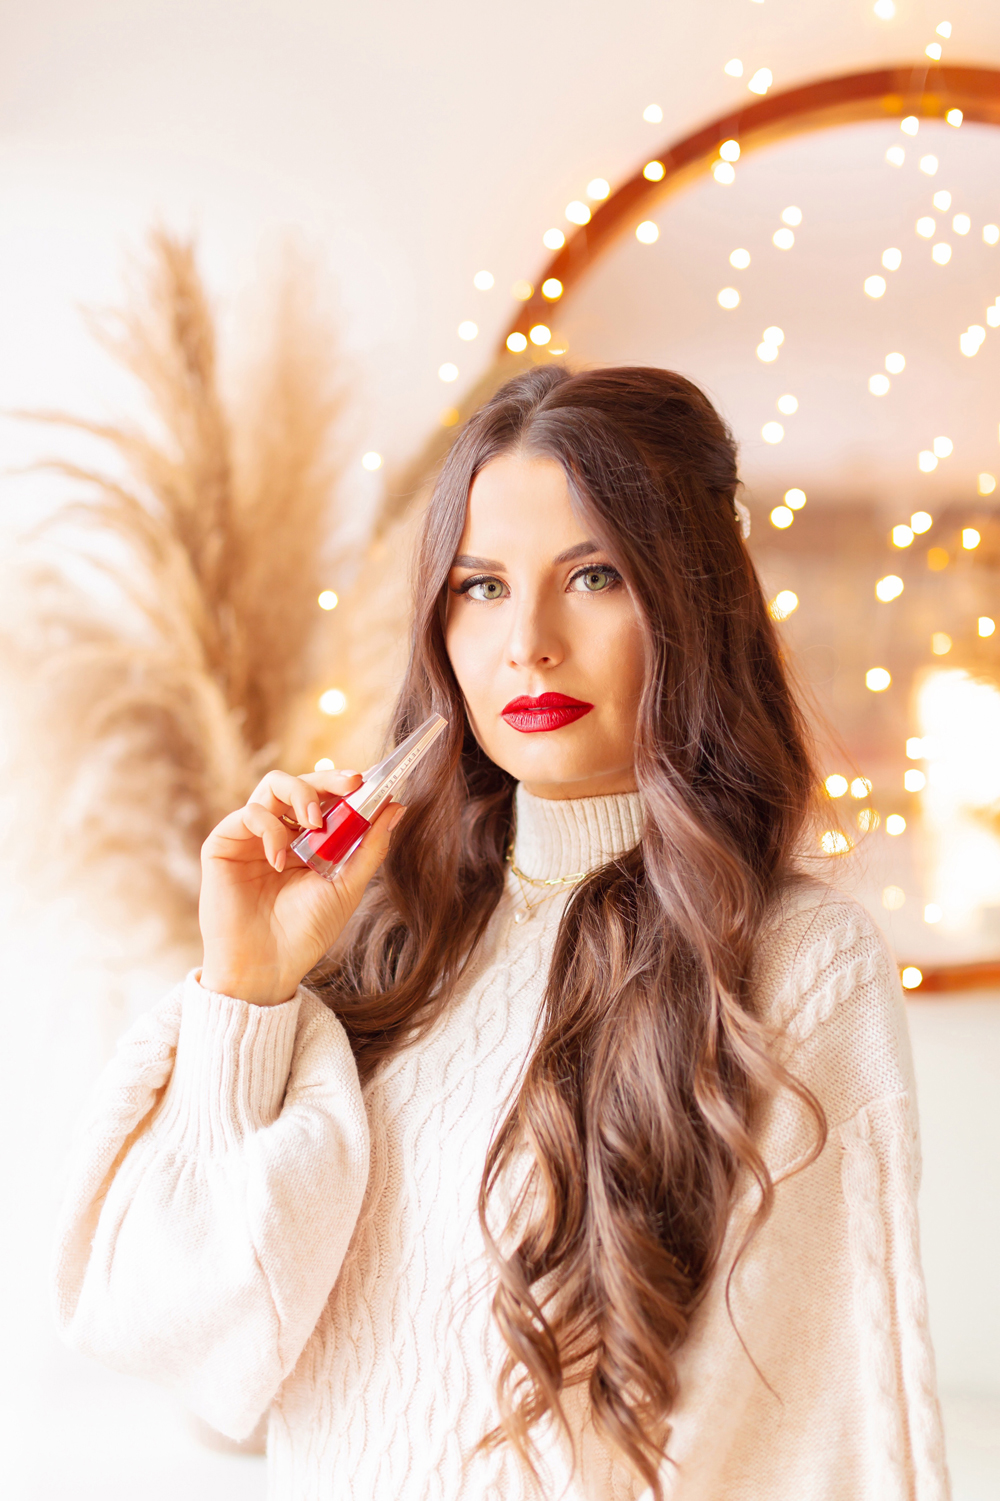 My Top 5 Red Lipsticks for the Holidays | FENTY BEAUTY by Rihanna Stunna Lip Paint Longwear Fluid Lip Color in Uncensored photos, review, swatches | Brunette woman wearing a red lipstick and cable kit sweater dress in a festive holiday setting with bokeh lights | Best universal red lipstick | Best luxury red lipstick | Best red liquid lipstick | Best long lasting red lipstick | Best red lipstick 2021 | Christmas lipstick 2021 | Calgary Beauty Blogger | Calgary Beauty Blogger // JustineCelina.com